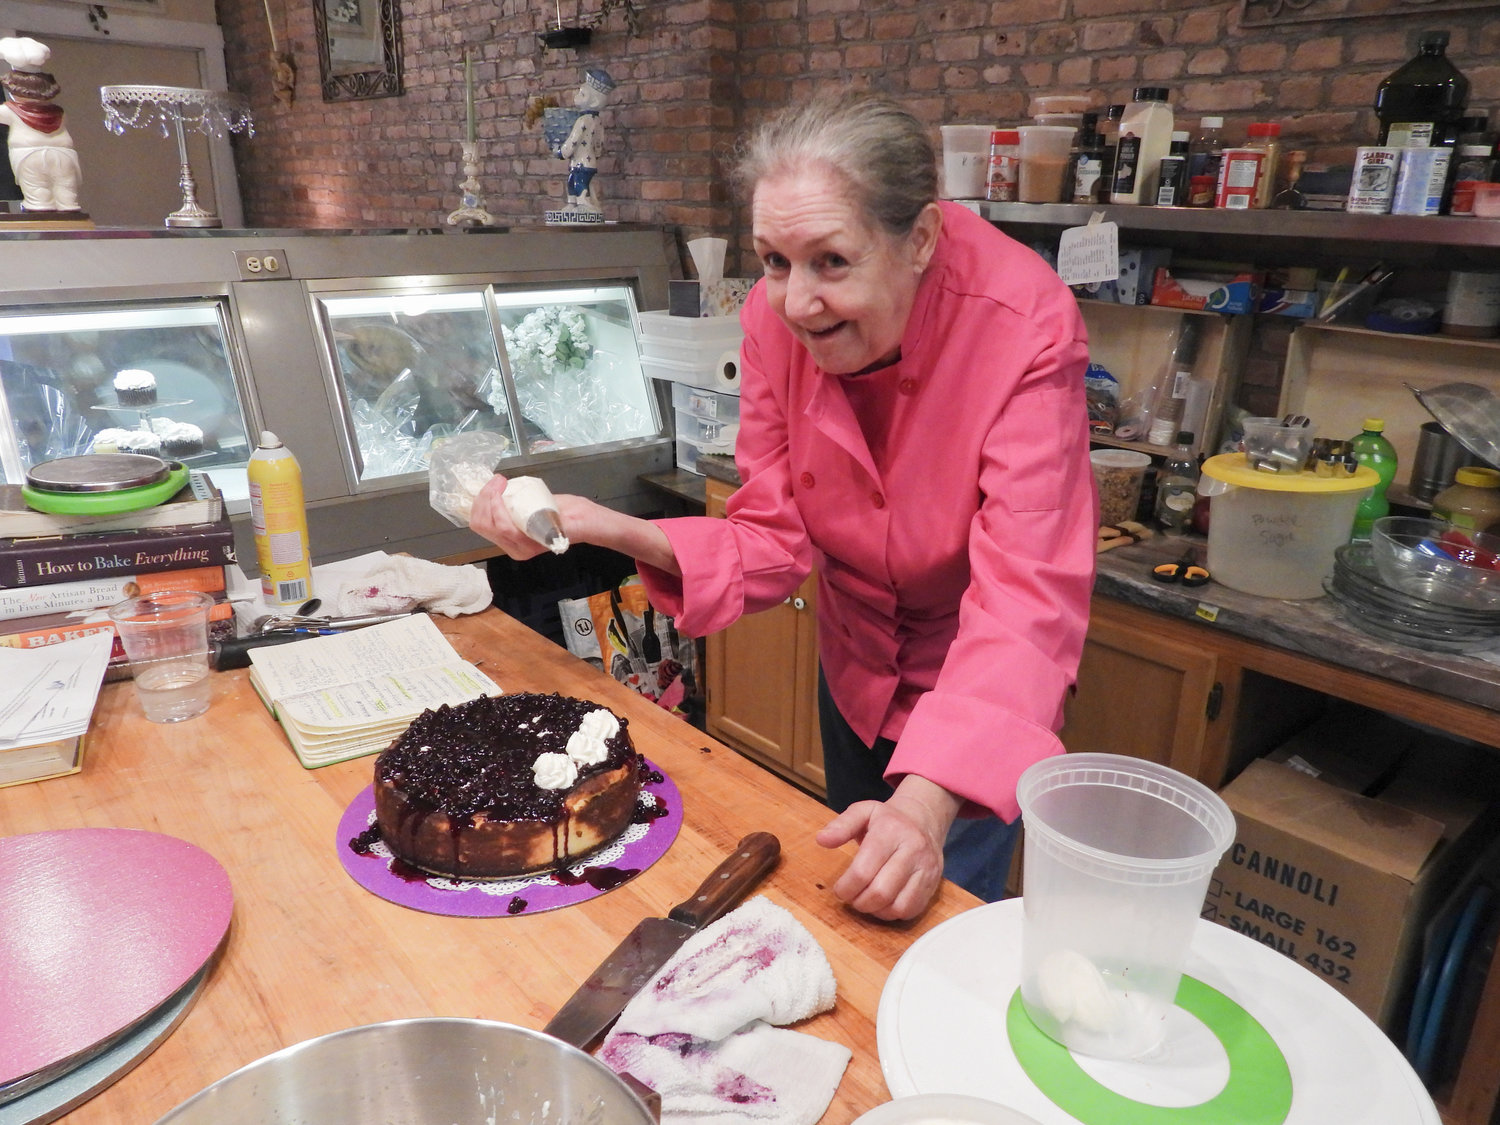 Head Baker Michelle French decorates her first blueberry cheesecake at Bella Vita Cafe, giving it a dollop of frosting for each slice.